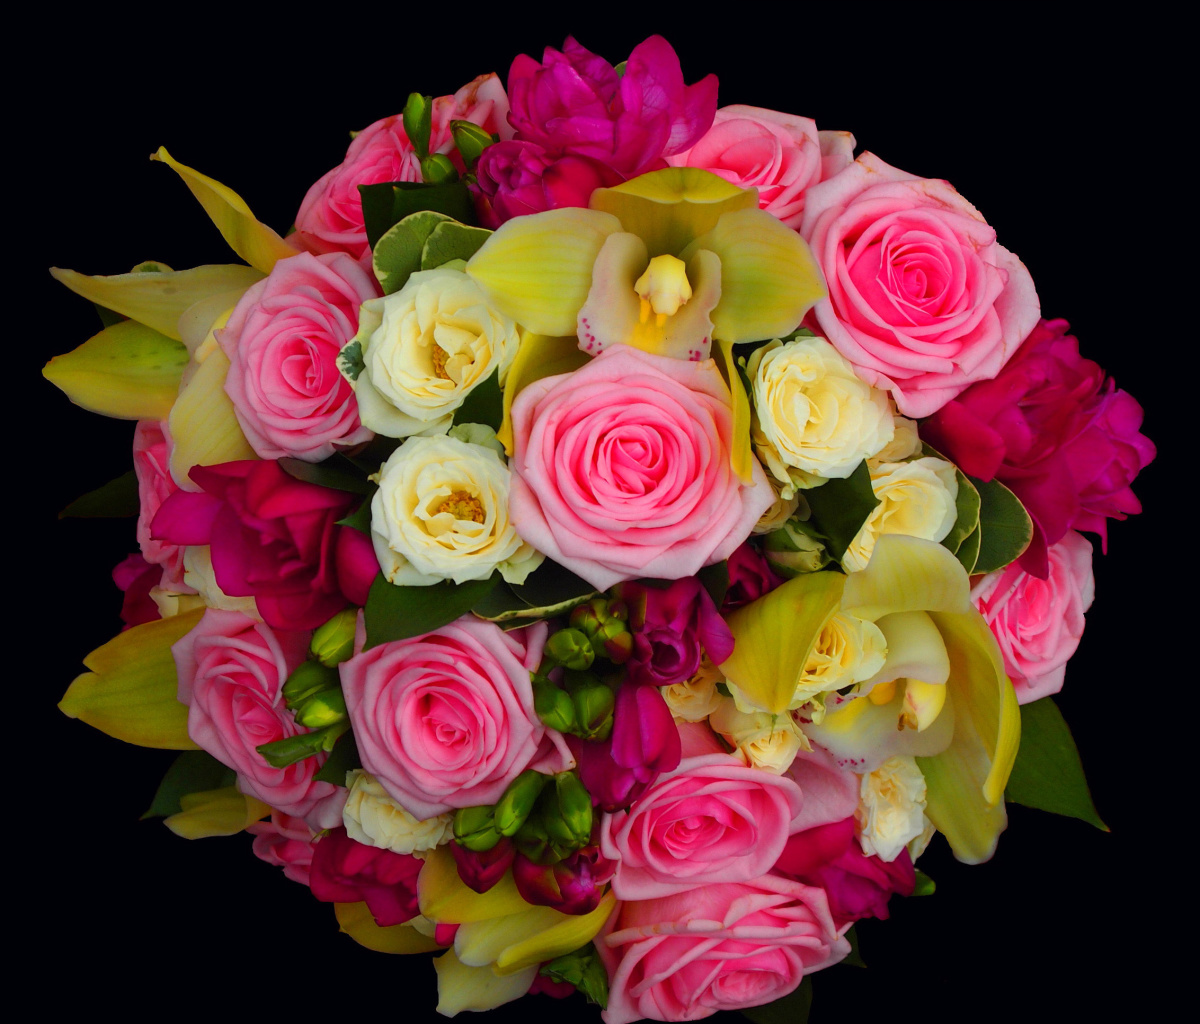 Bouquet of roses and yellow orchid, floristry wallpaper 1200x1024